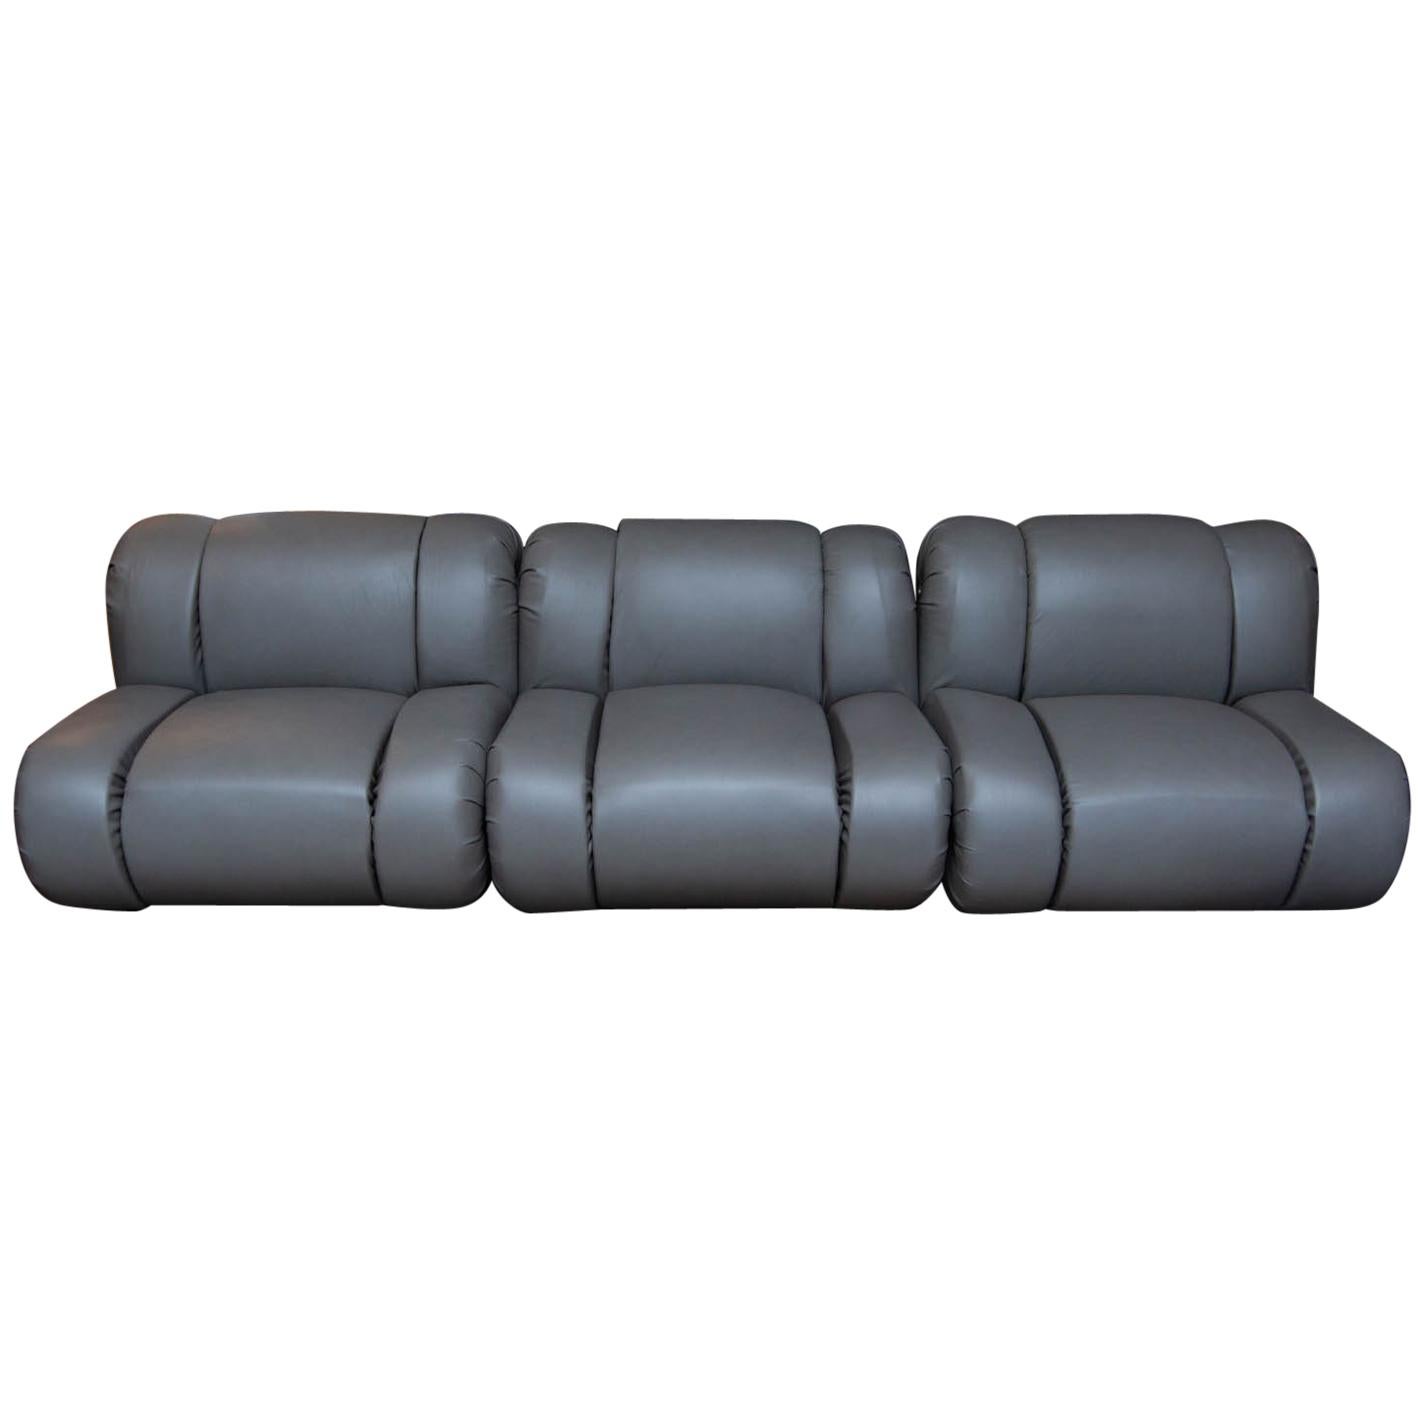 Mario Bellini Style Leather Sectional Sofa For Sale